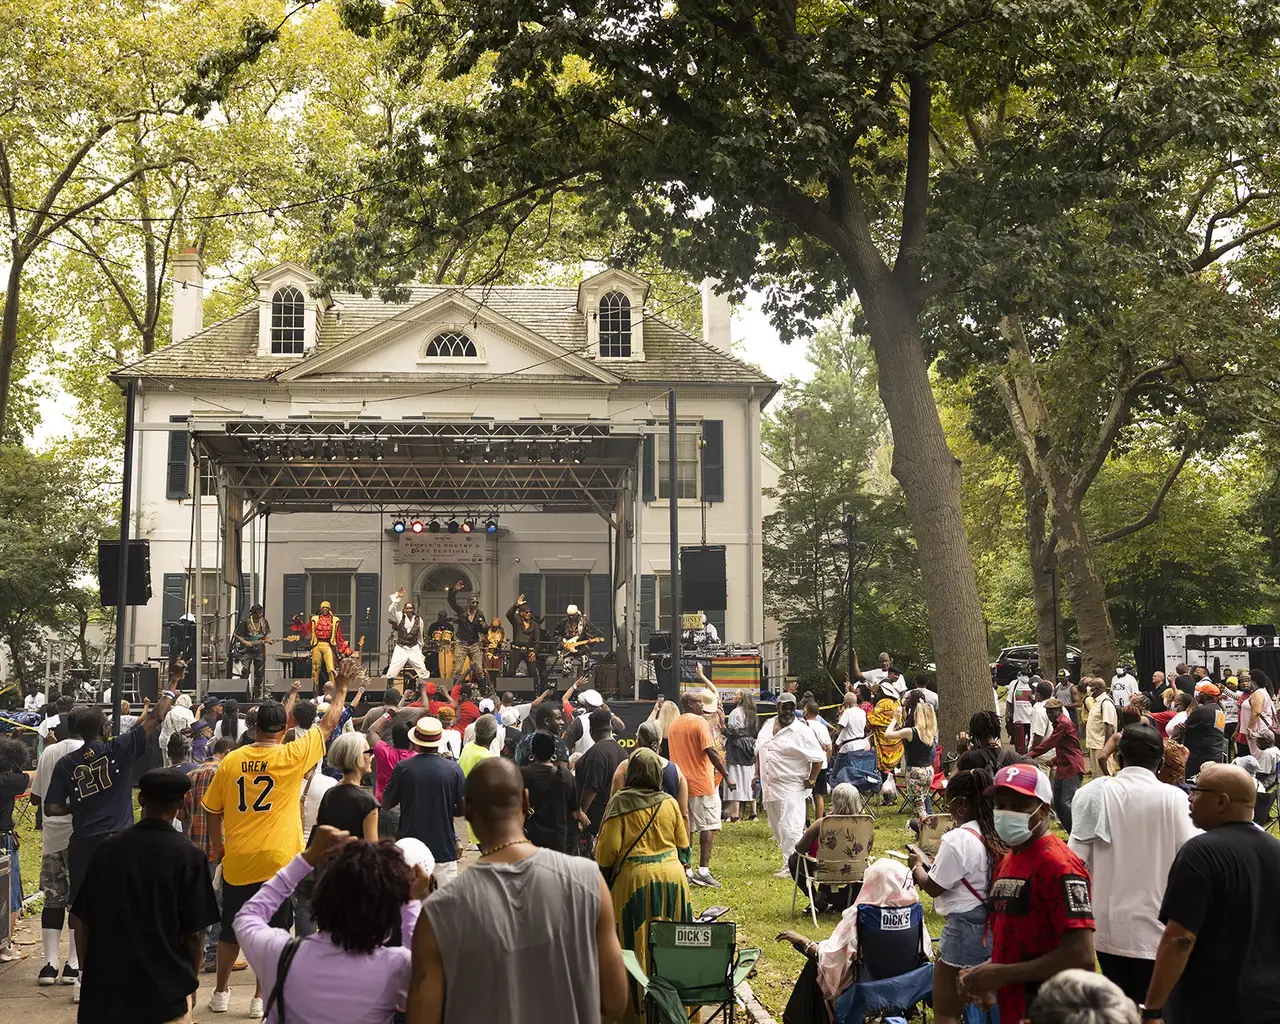 Historic Germantown, People's Poetry and Jazz Festival presented by the Black Writers Museum, 2021, Vernon Park, Philadelphia, PA. Photo by Ryan Collerd.